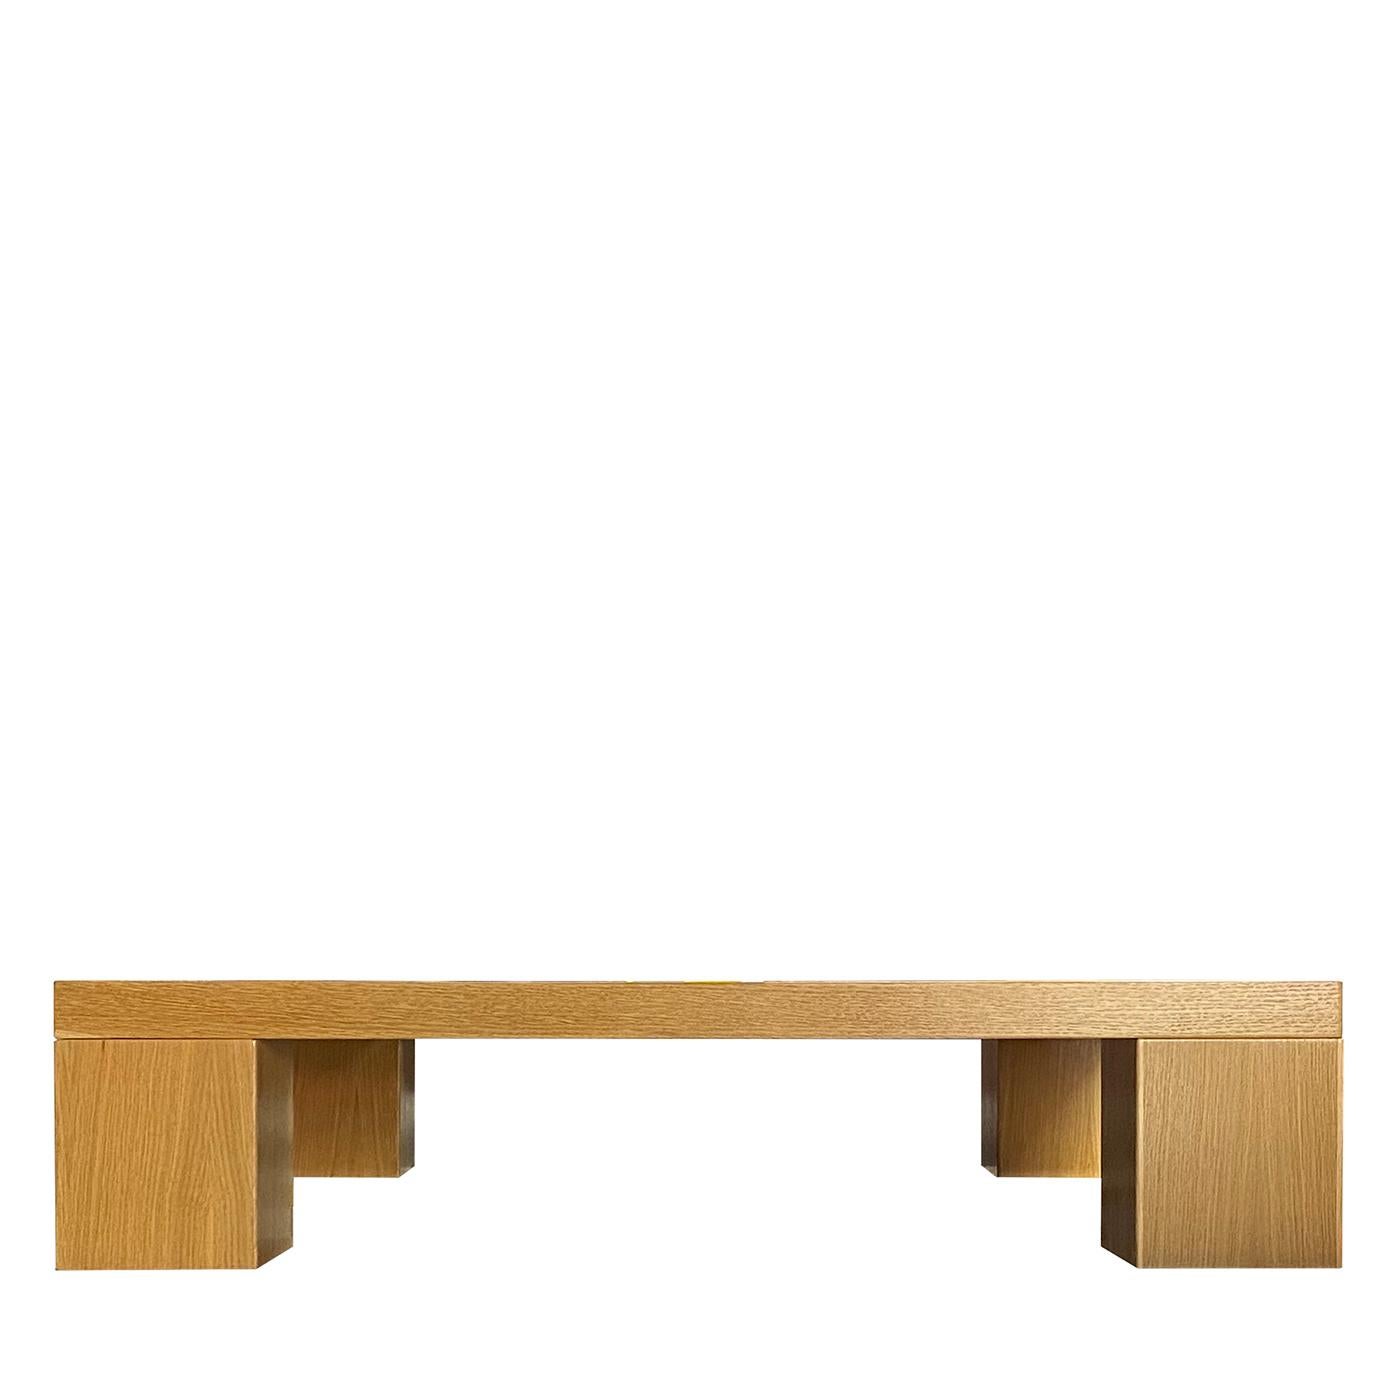 This stunning coffee table is an original design by Ferdinando Meccani where unrepeatable natural traceries are combined to a bold durmast frame of minimalist inspiration. Part of a numbered series of only 10 pieces, it stands out for the square